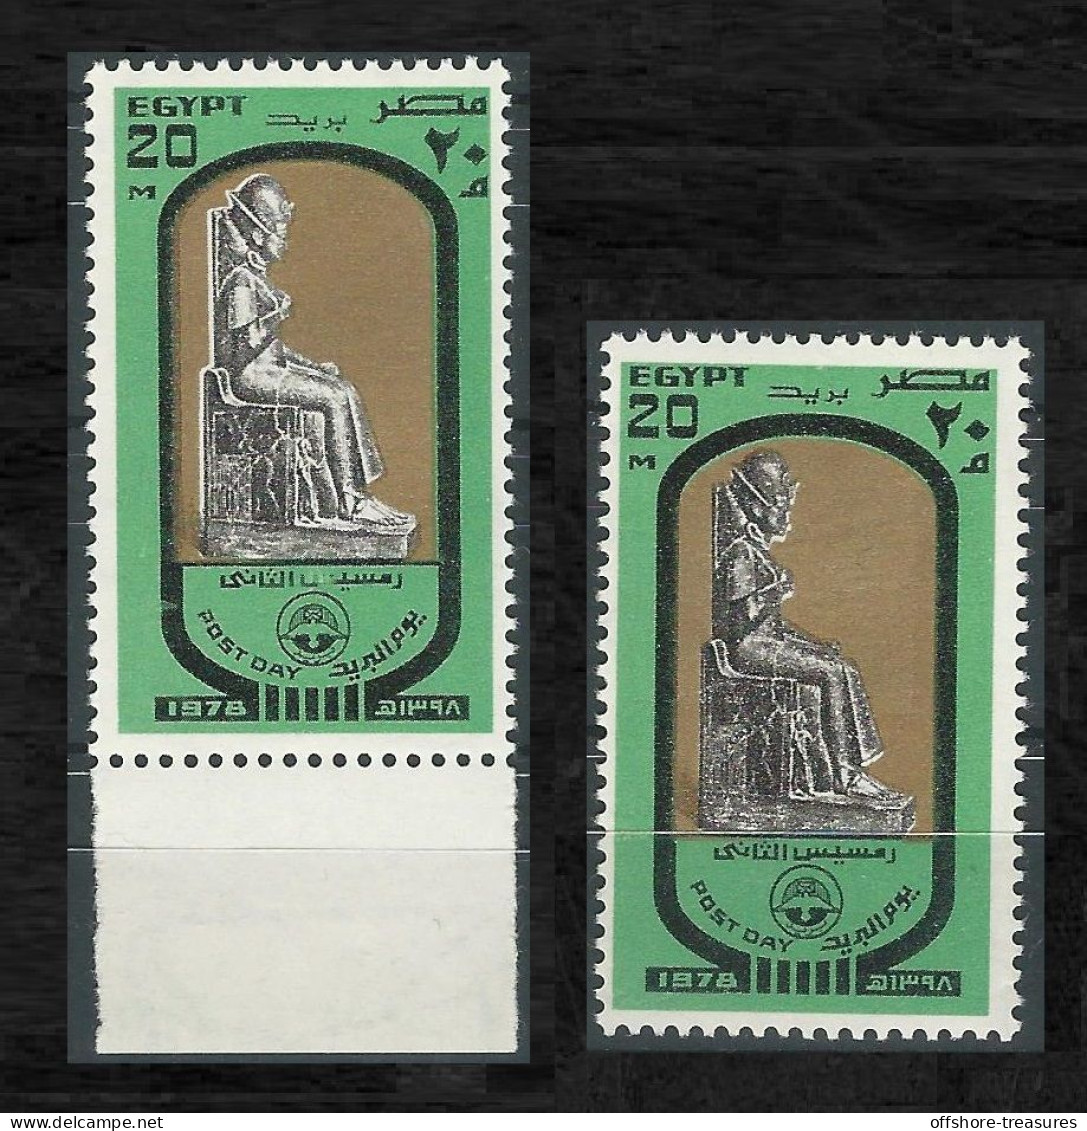 Egypt 1987 King Ramses Post Day 2 STAMP PRINT VARIETY / ERROR MNH STAMPS / SEE SCANS - Covers & Documents